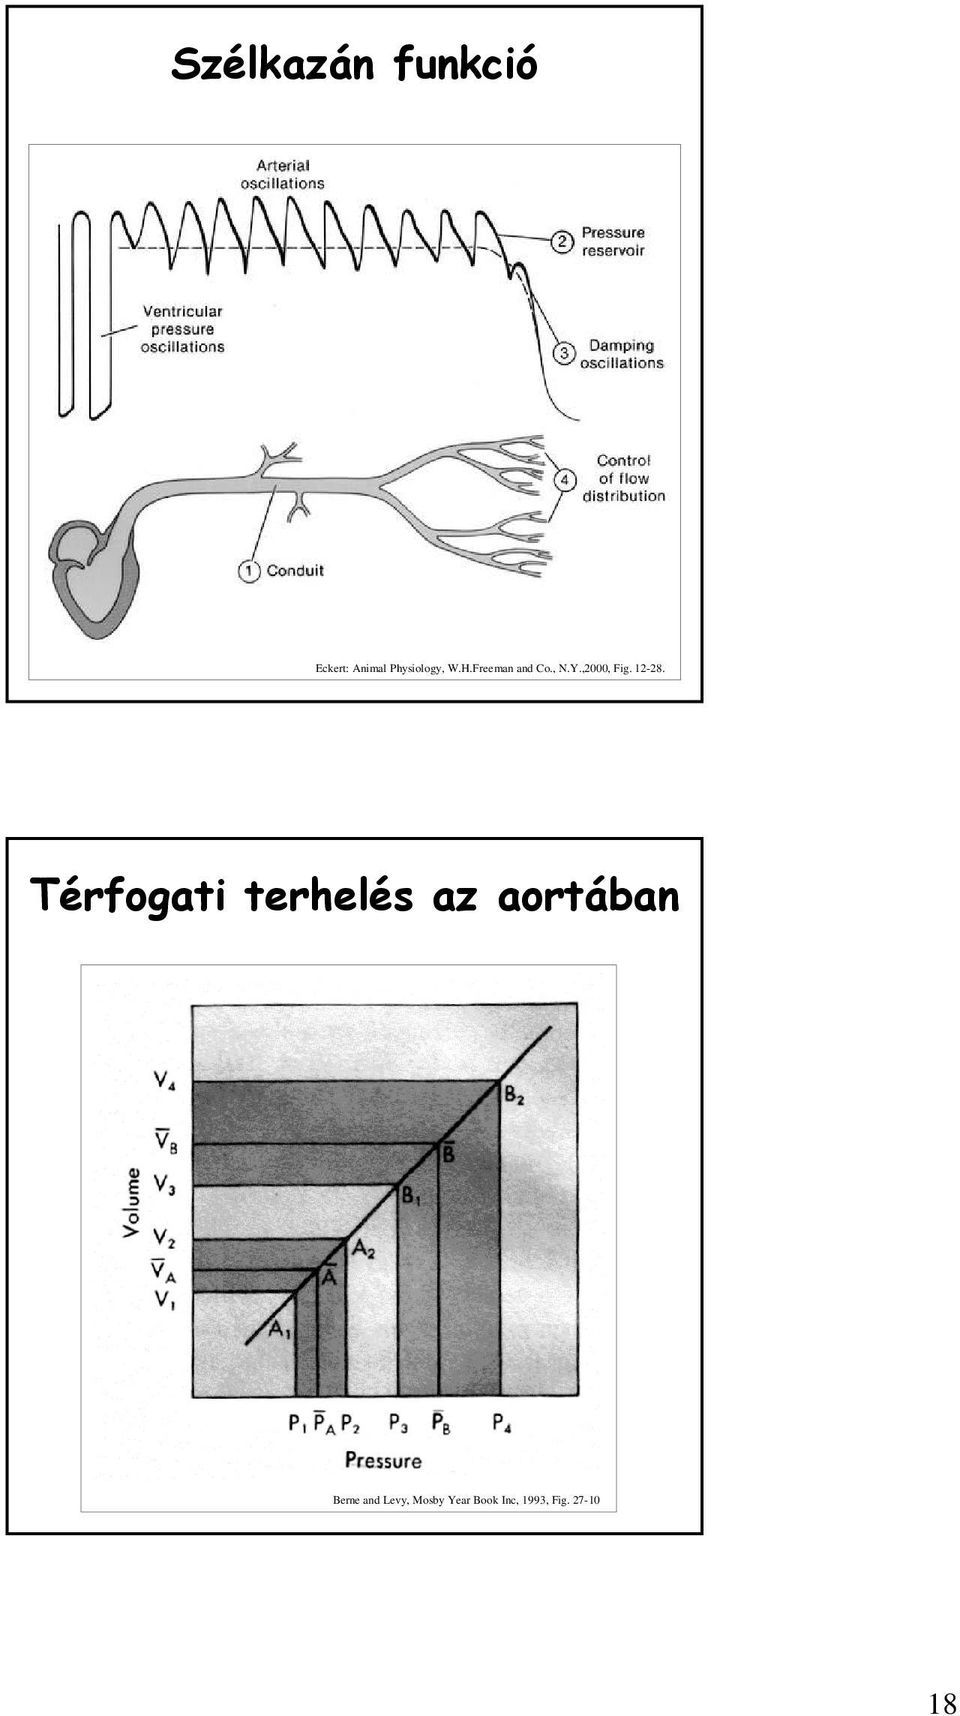 ,2000, Fig. 12-28.